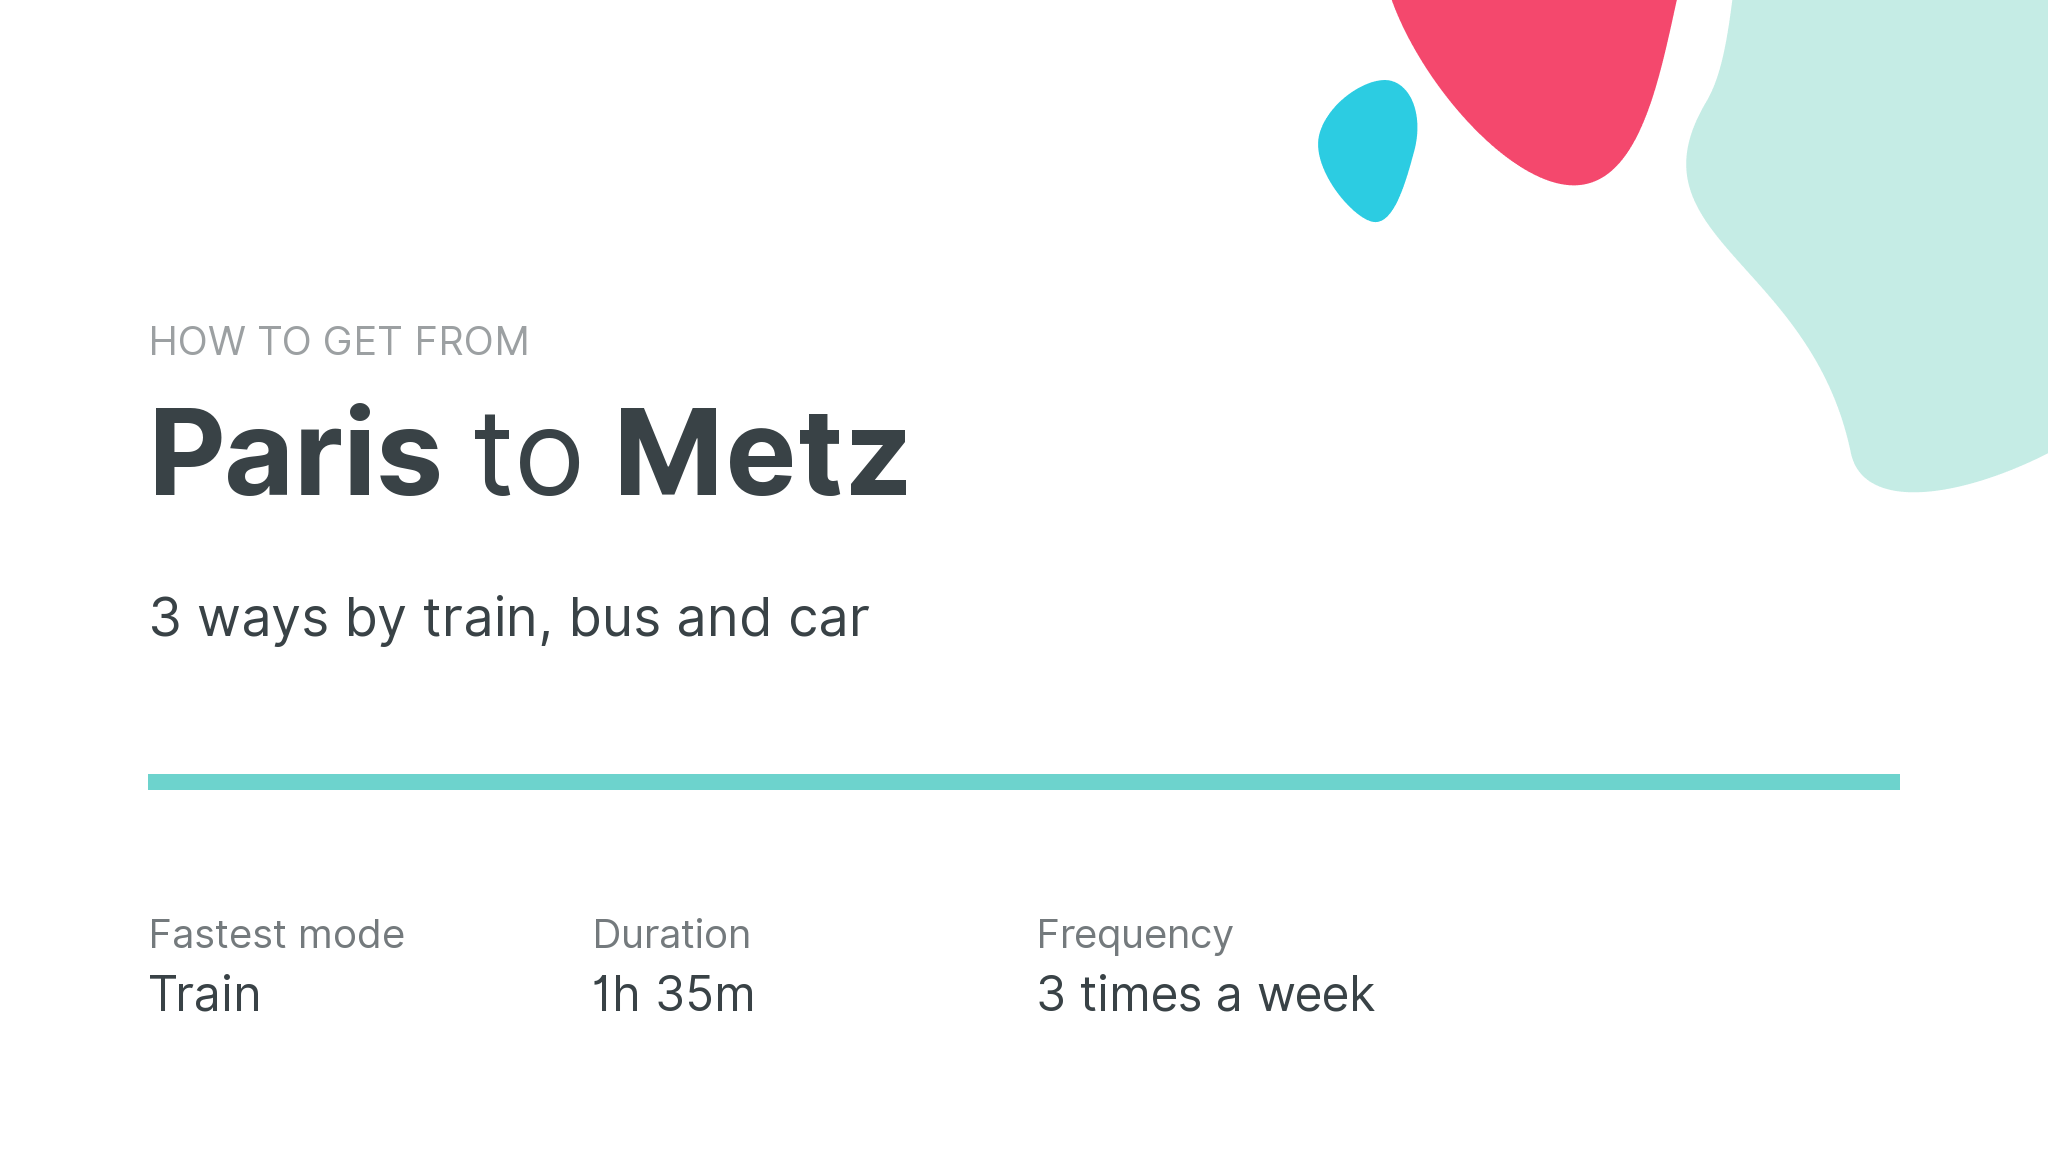 How do I get from Paris to Metz